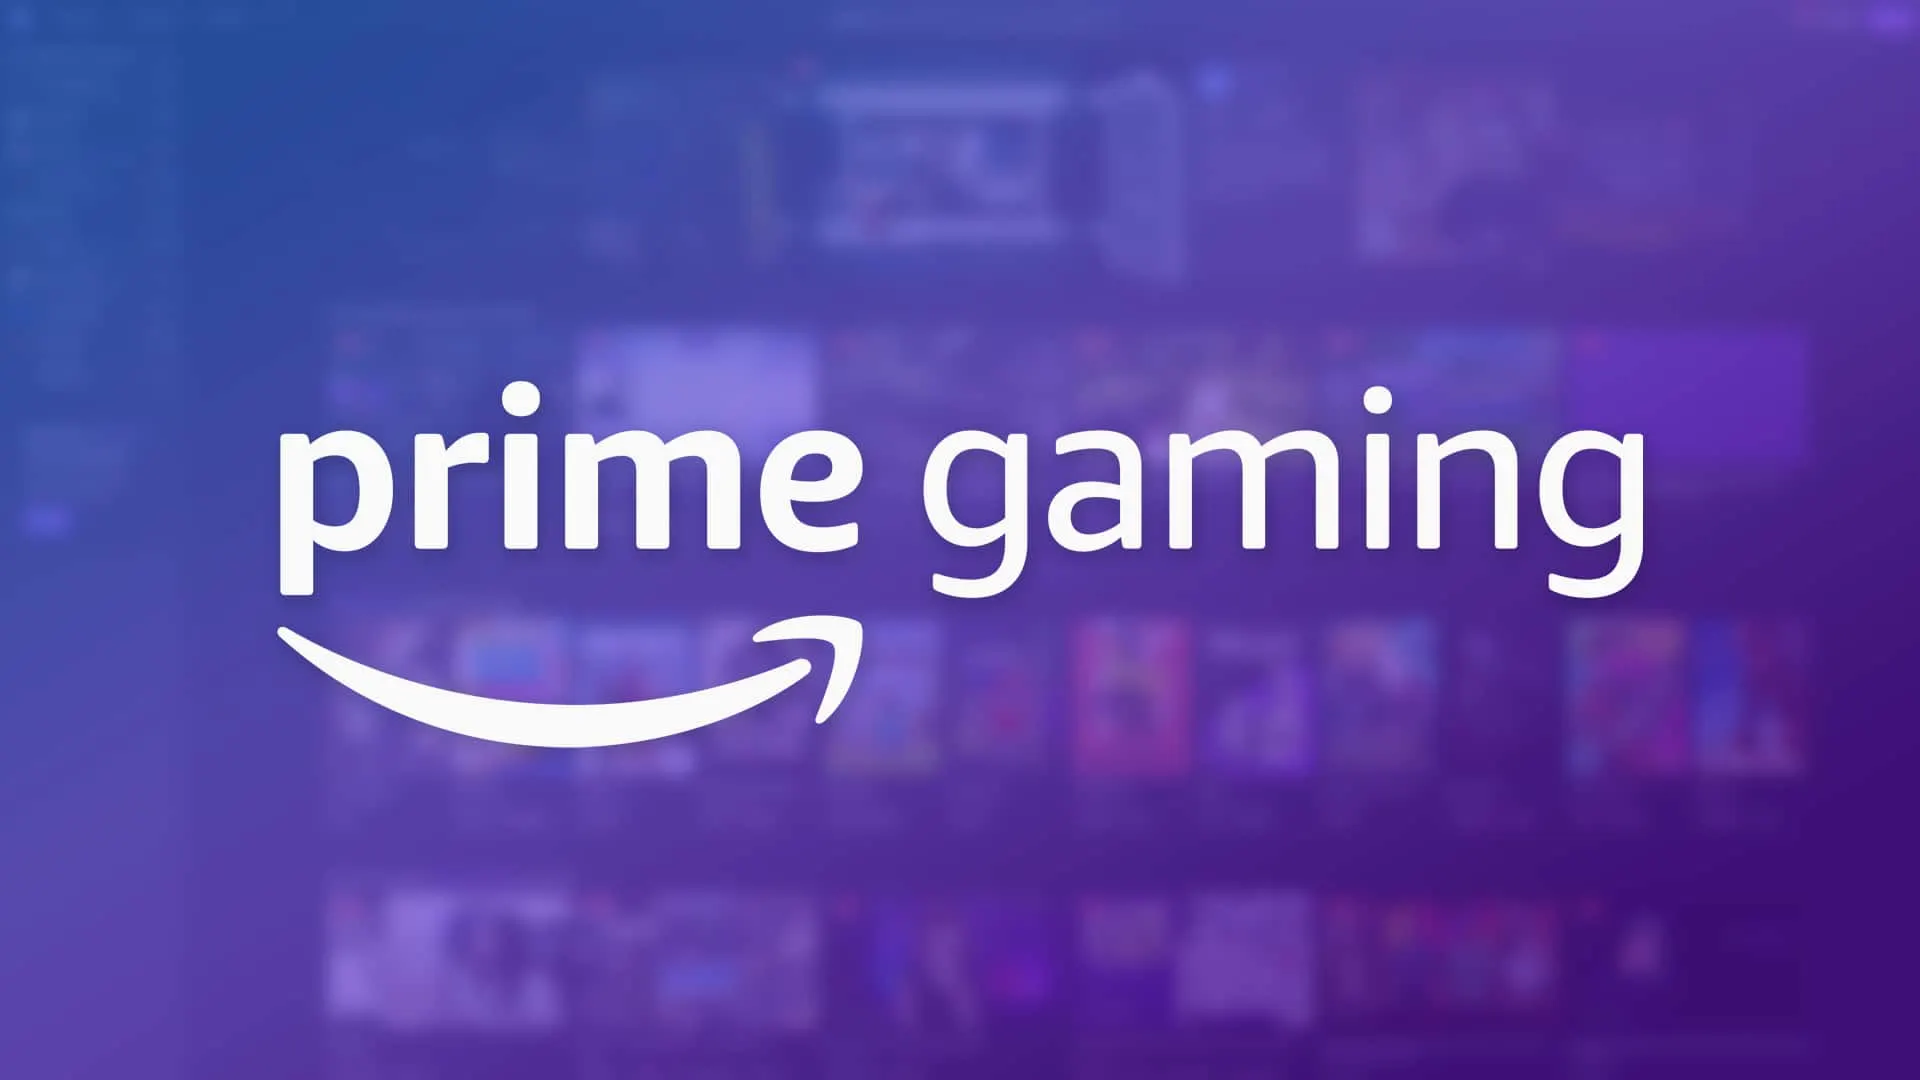 Prime Gaming Members Can Claim Classic Games and In-Game Content